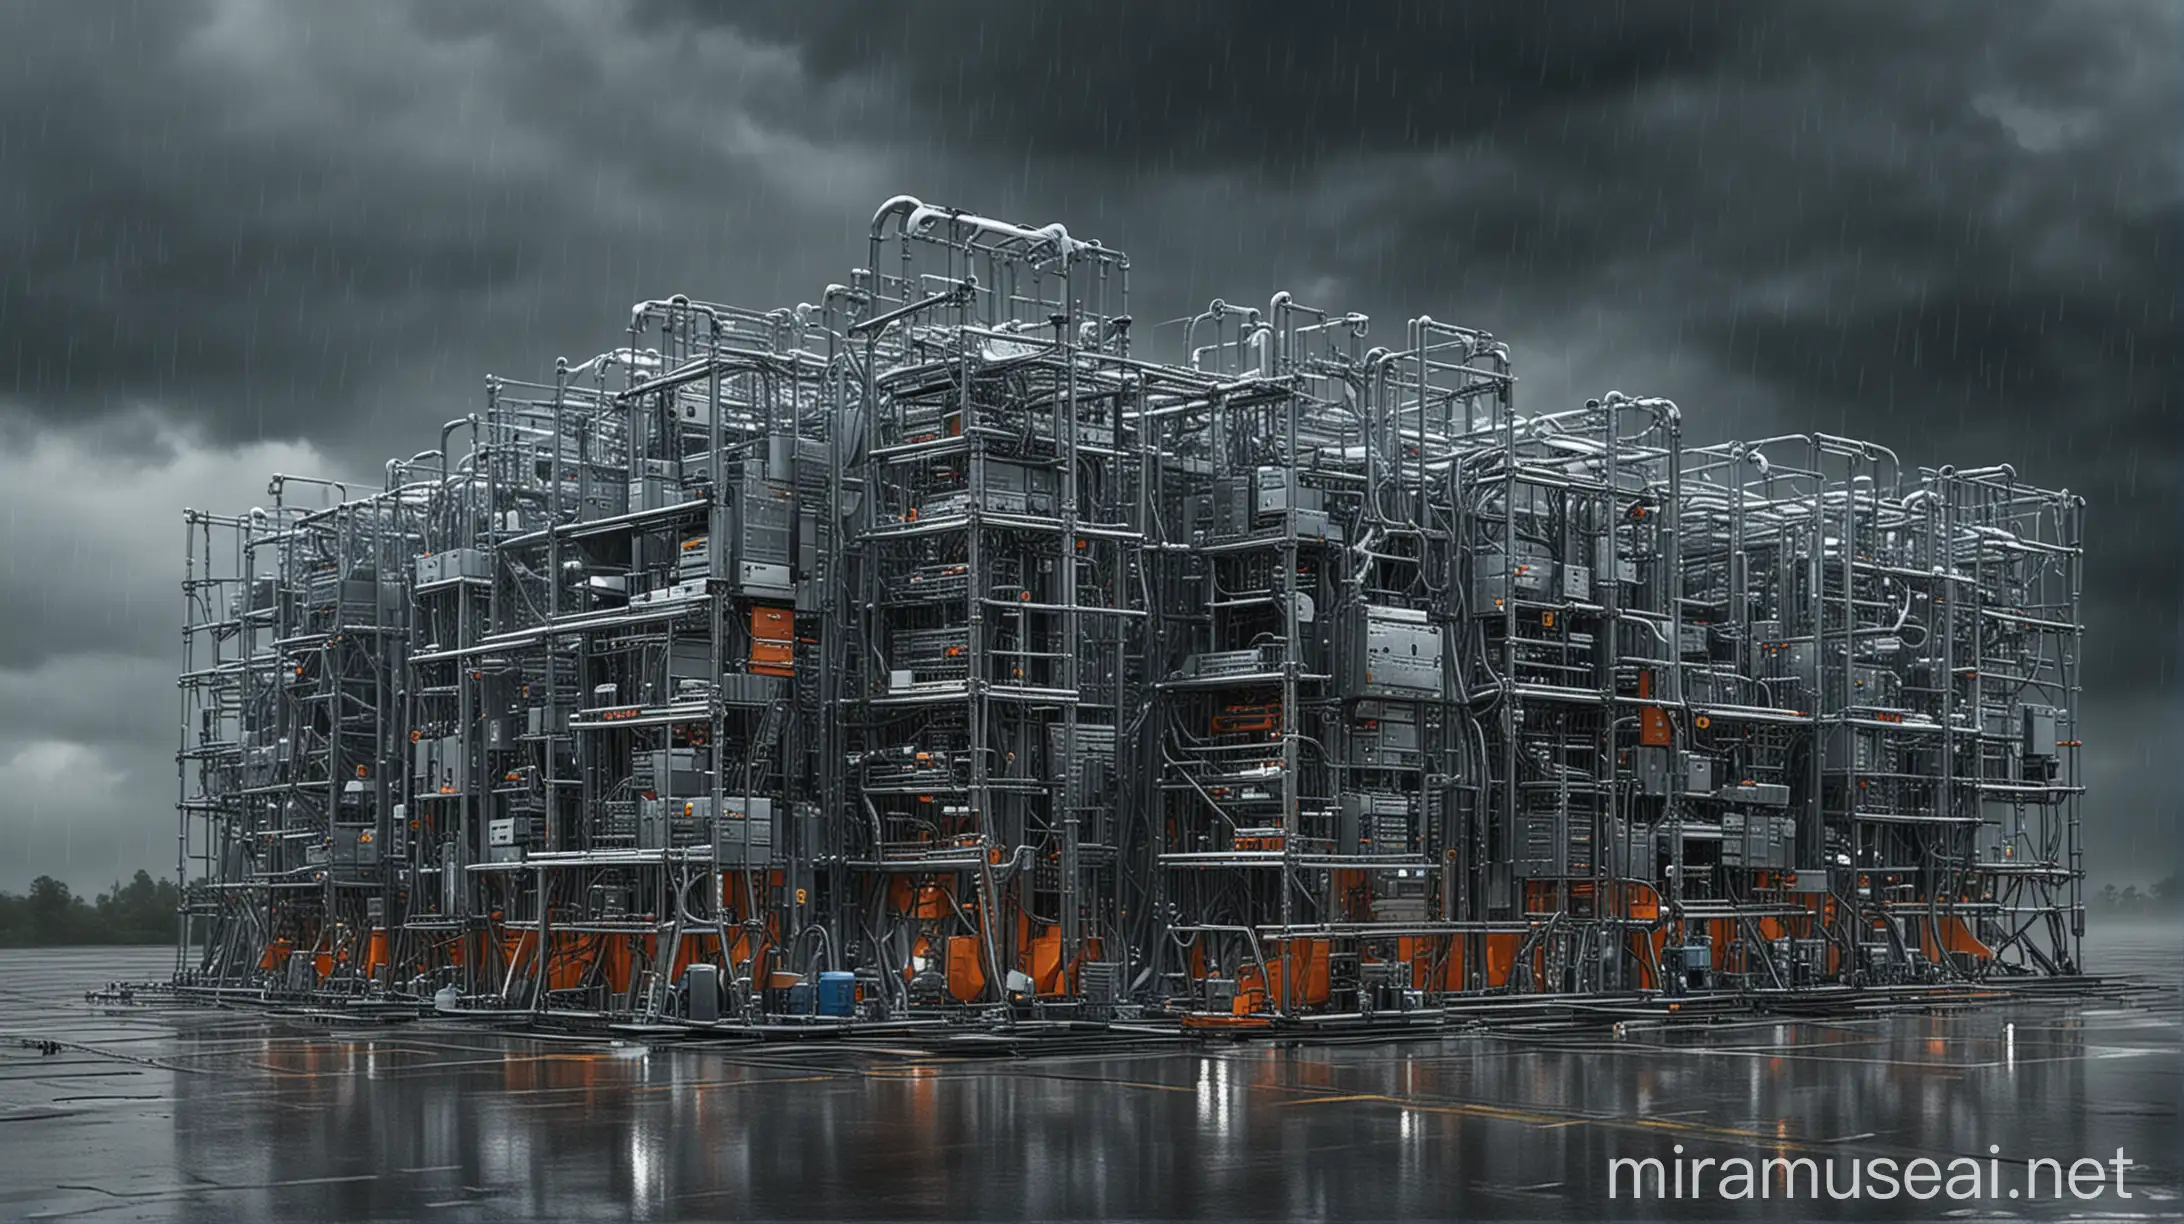 photorealistic picture but showing imaginary large metal structure with smaller computational units representing virtual machines in a hyper-V showing them as computational machines within a vast structure holding them within. Use metal, cool colours and a hint of rain and outdoor cloudy weather. Make the structure huge to give a sense of massive scale. 
